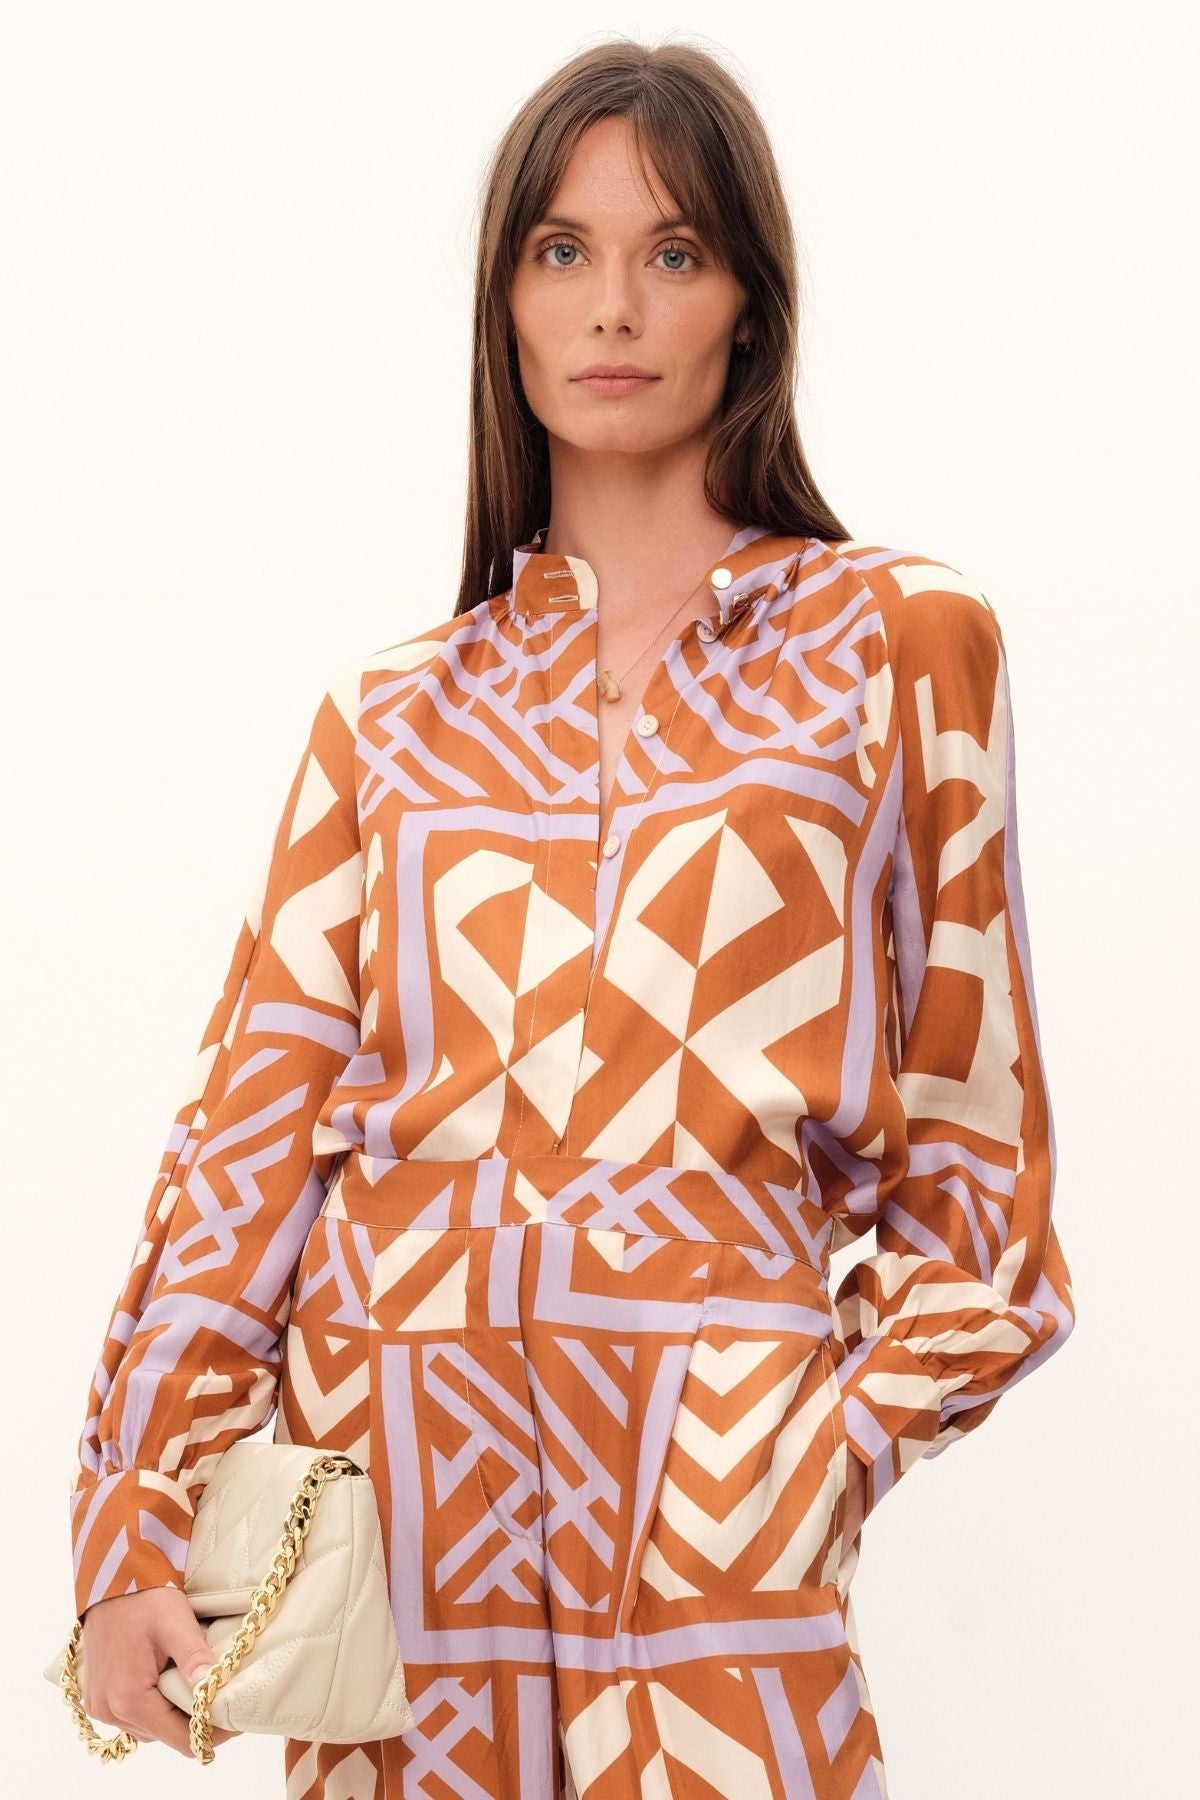 The House of Mirrors Blouse by GINGER & SMART has a bold geometric print in shades of crème, lilac, and tan. It includes a mandarin-style collar, concealed front placket, and full raglan sleeves with cuffs. Made with luxurious silk twill.